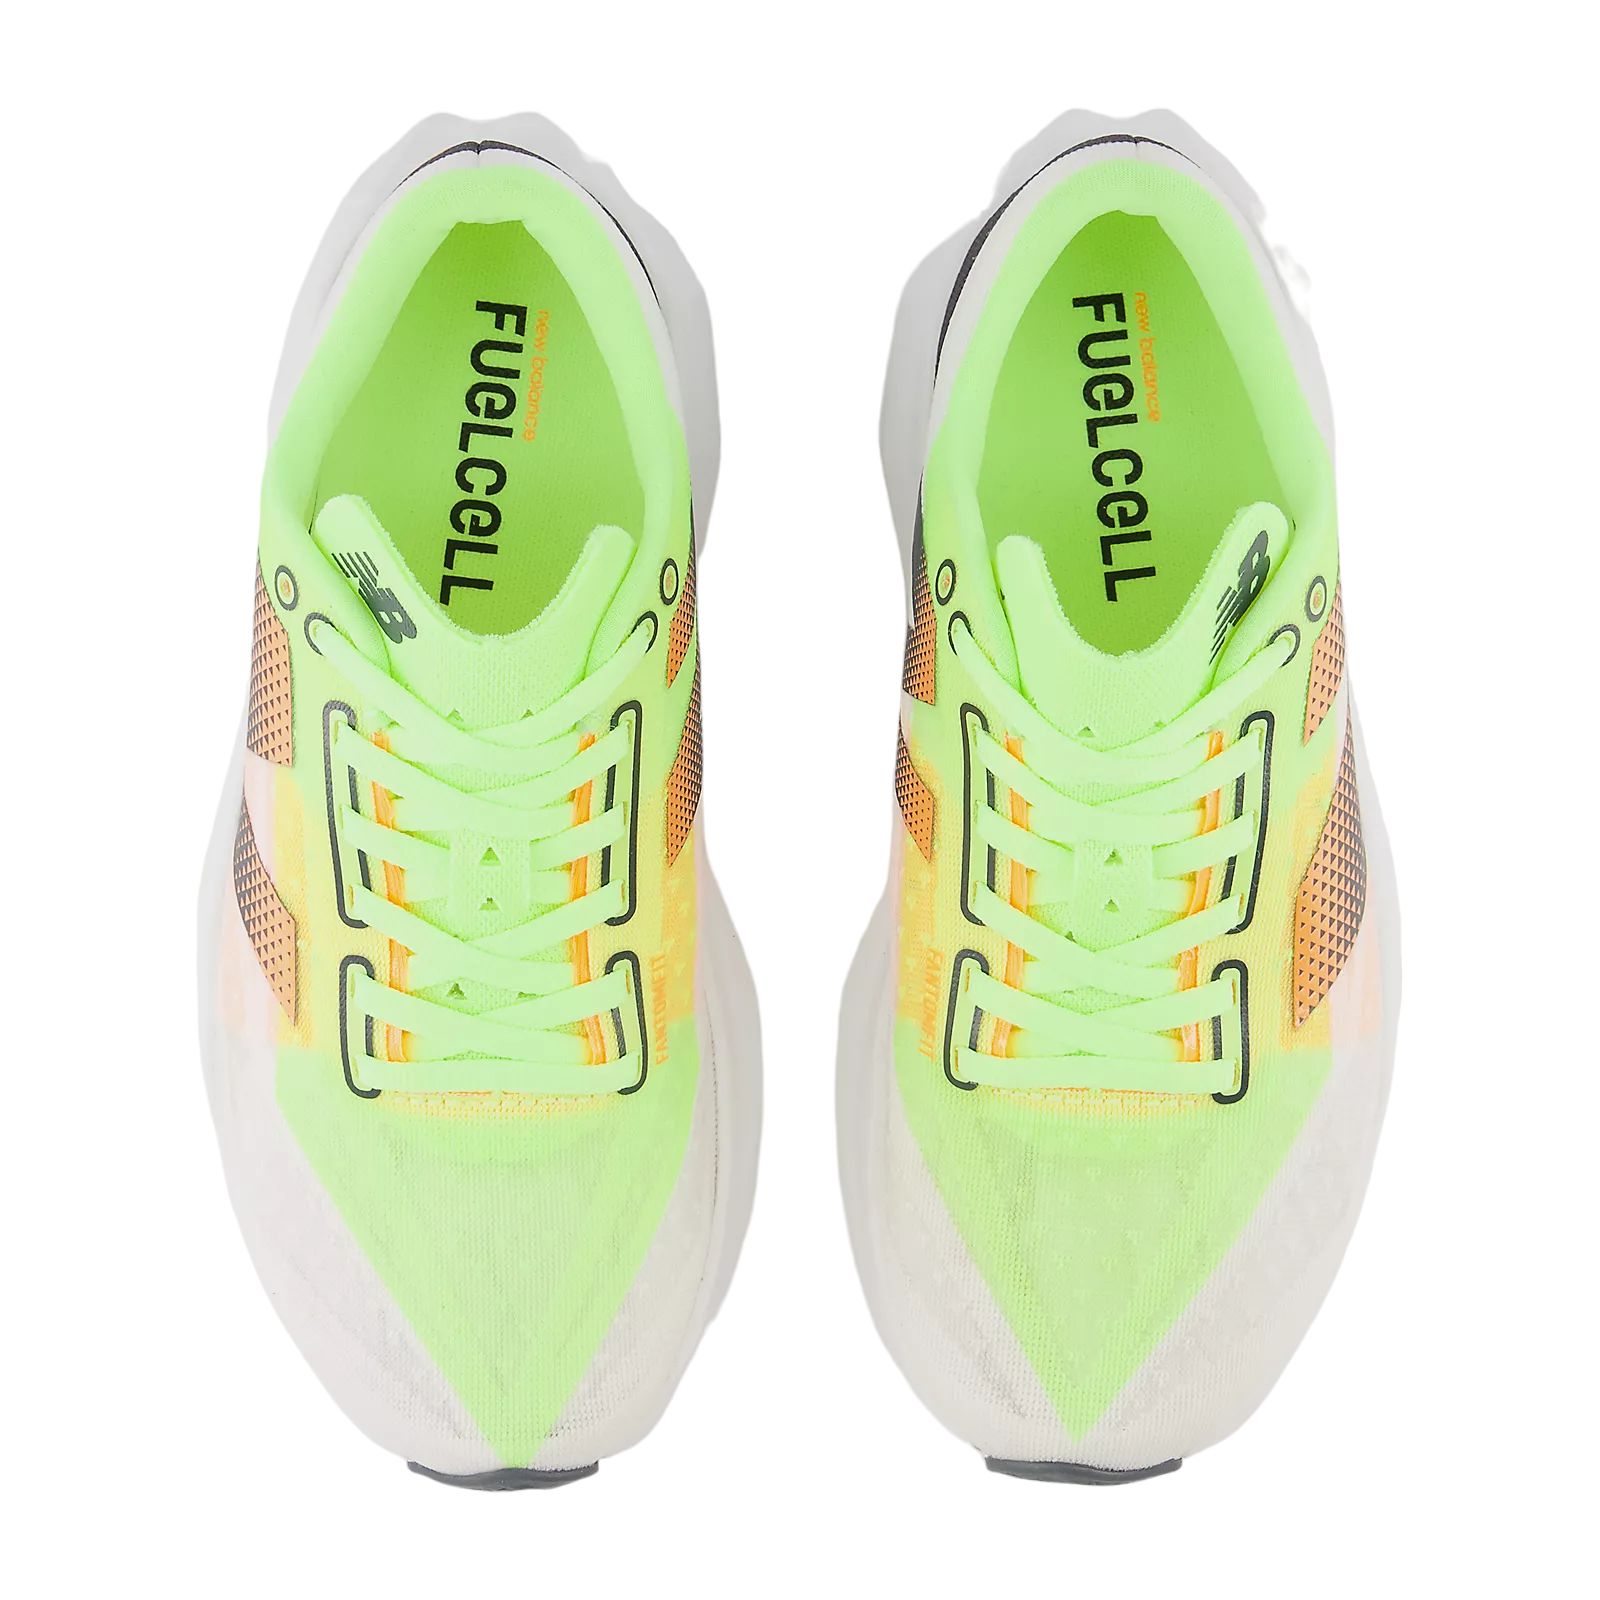 Women's FuelCell Rebel v4 Shoes White/Bleached Lime/Hot Mango 